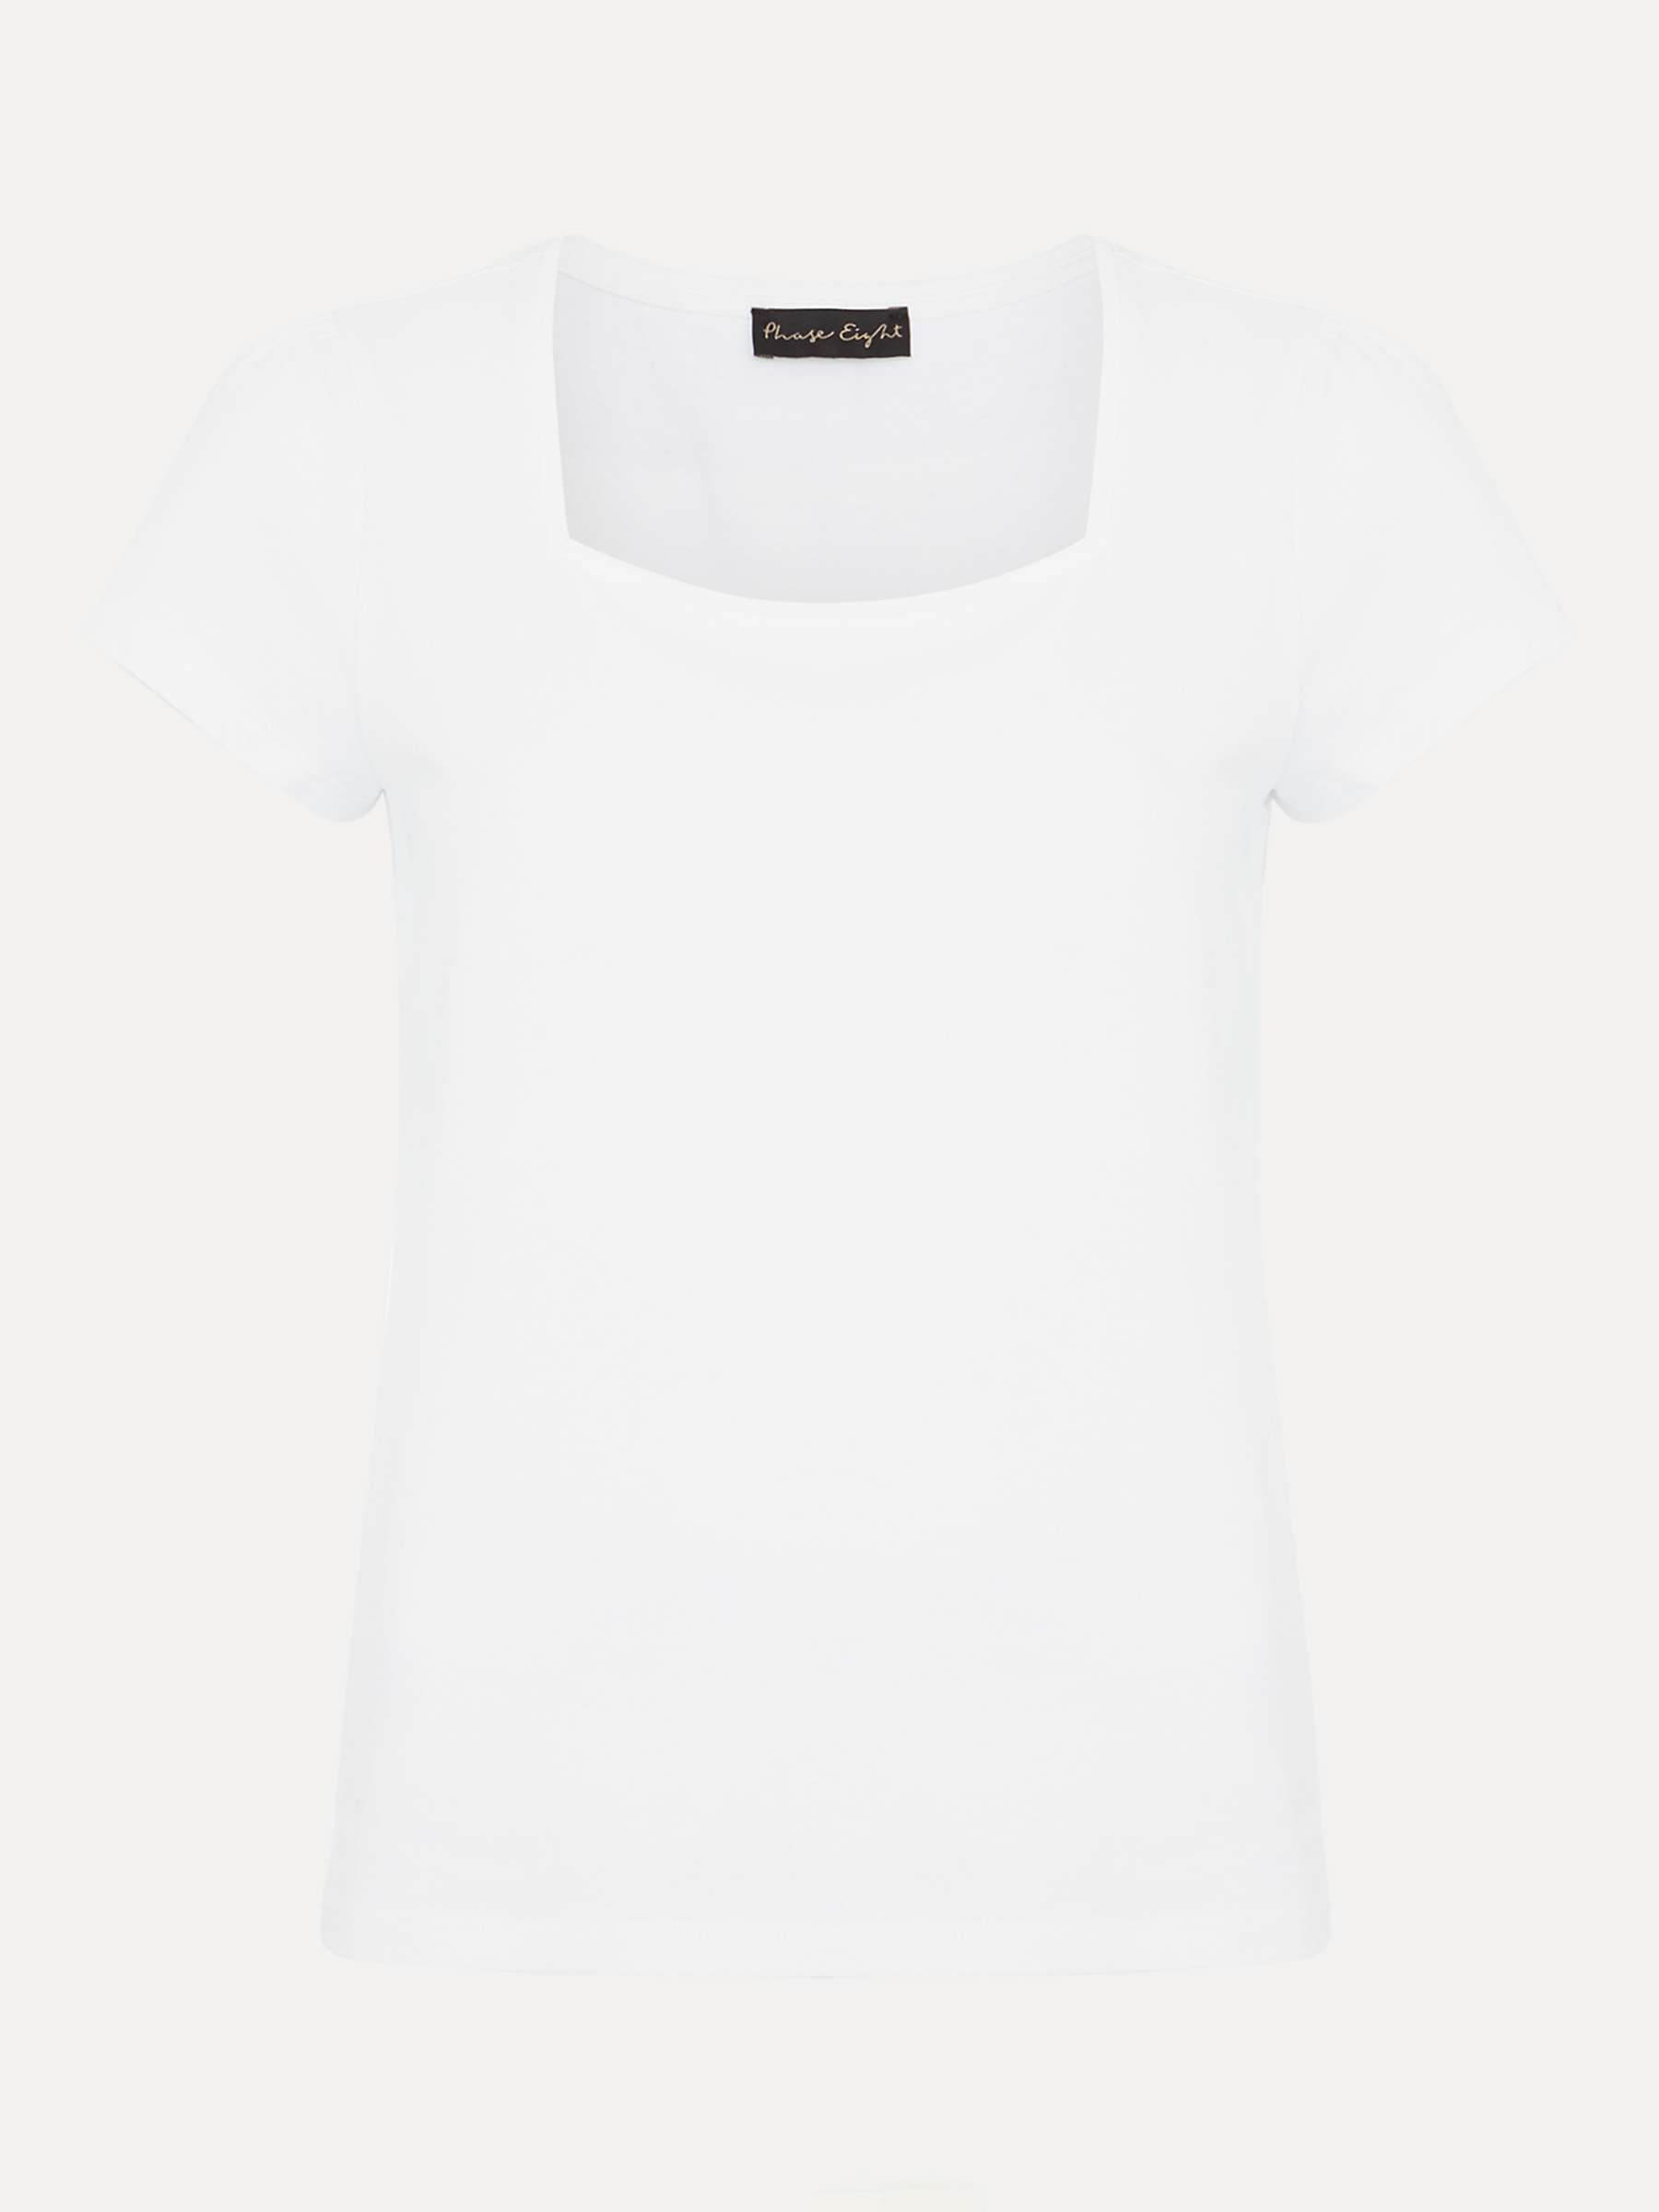 Buy Phase Eight Bella Cotton T-Shirt, White Online at johnlewis.com